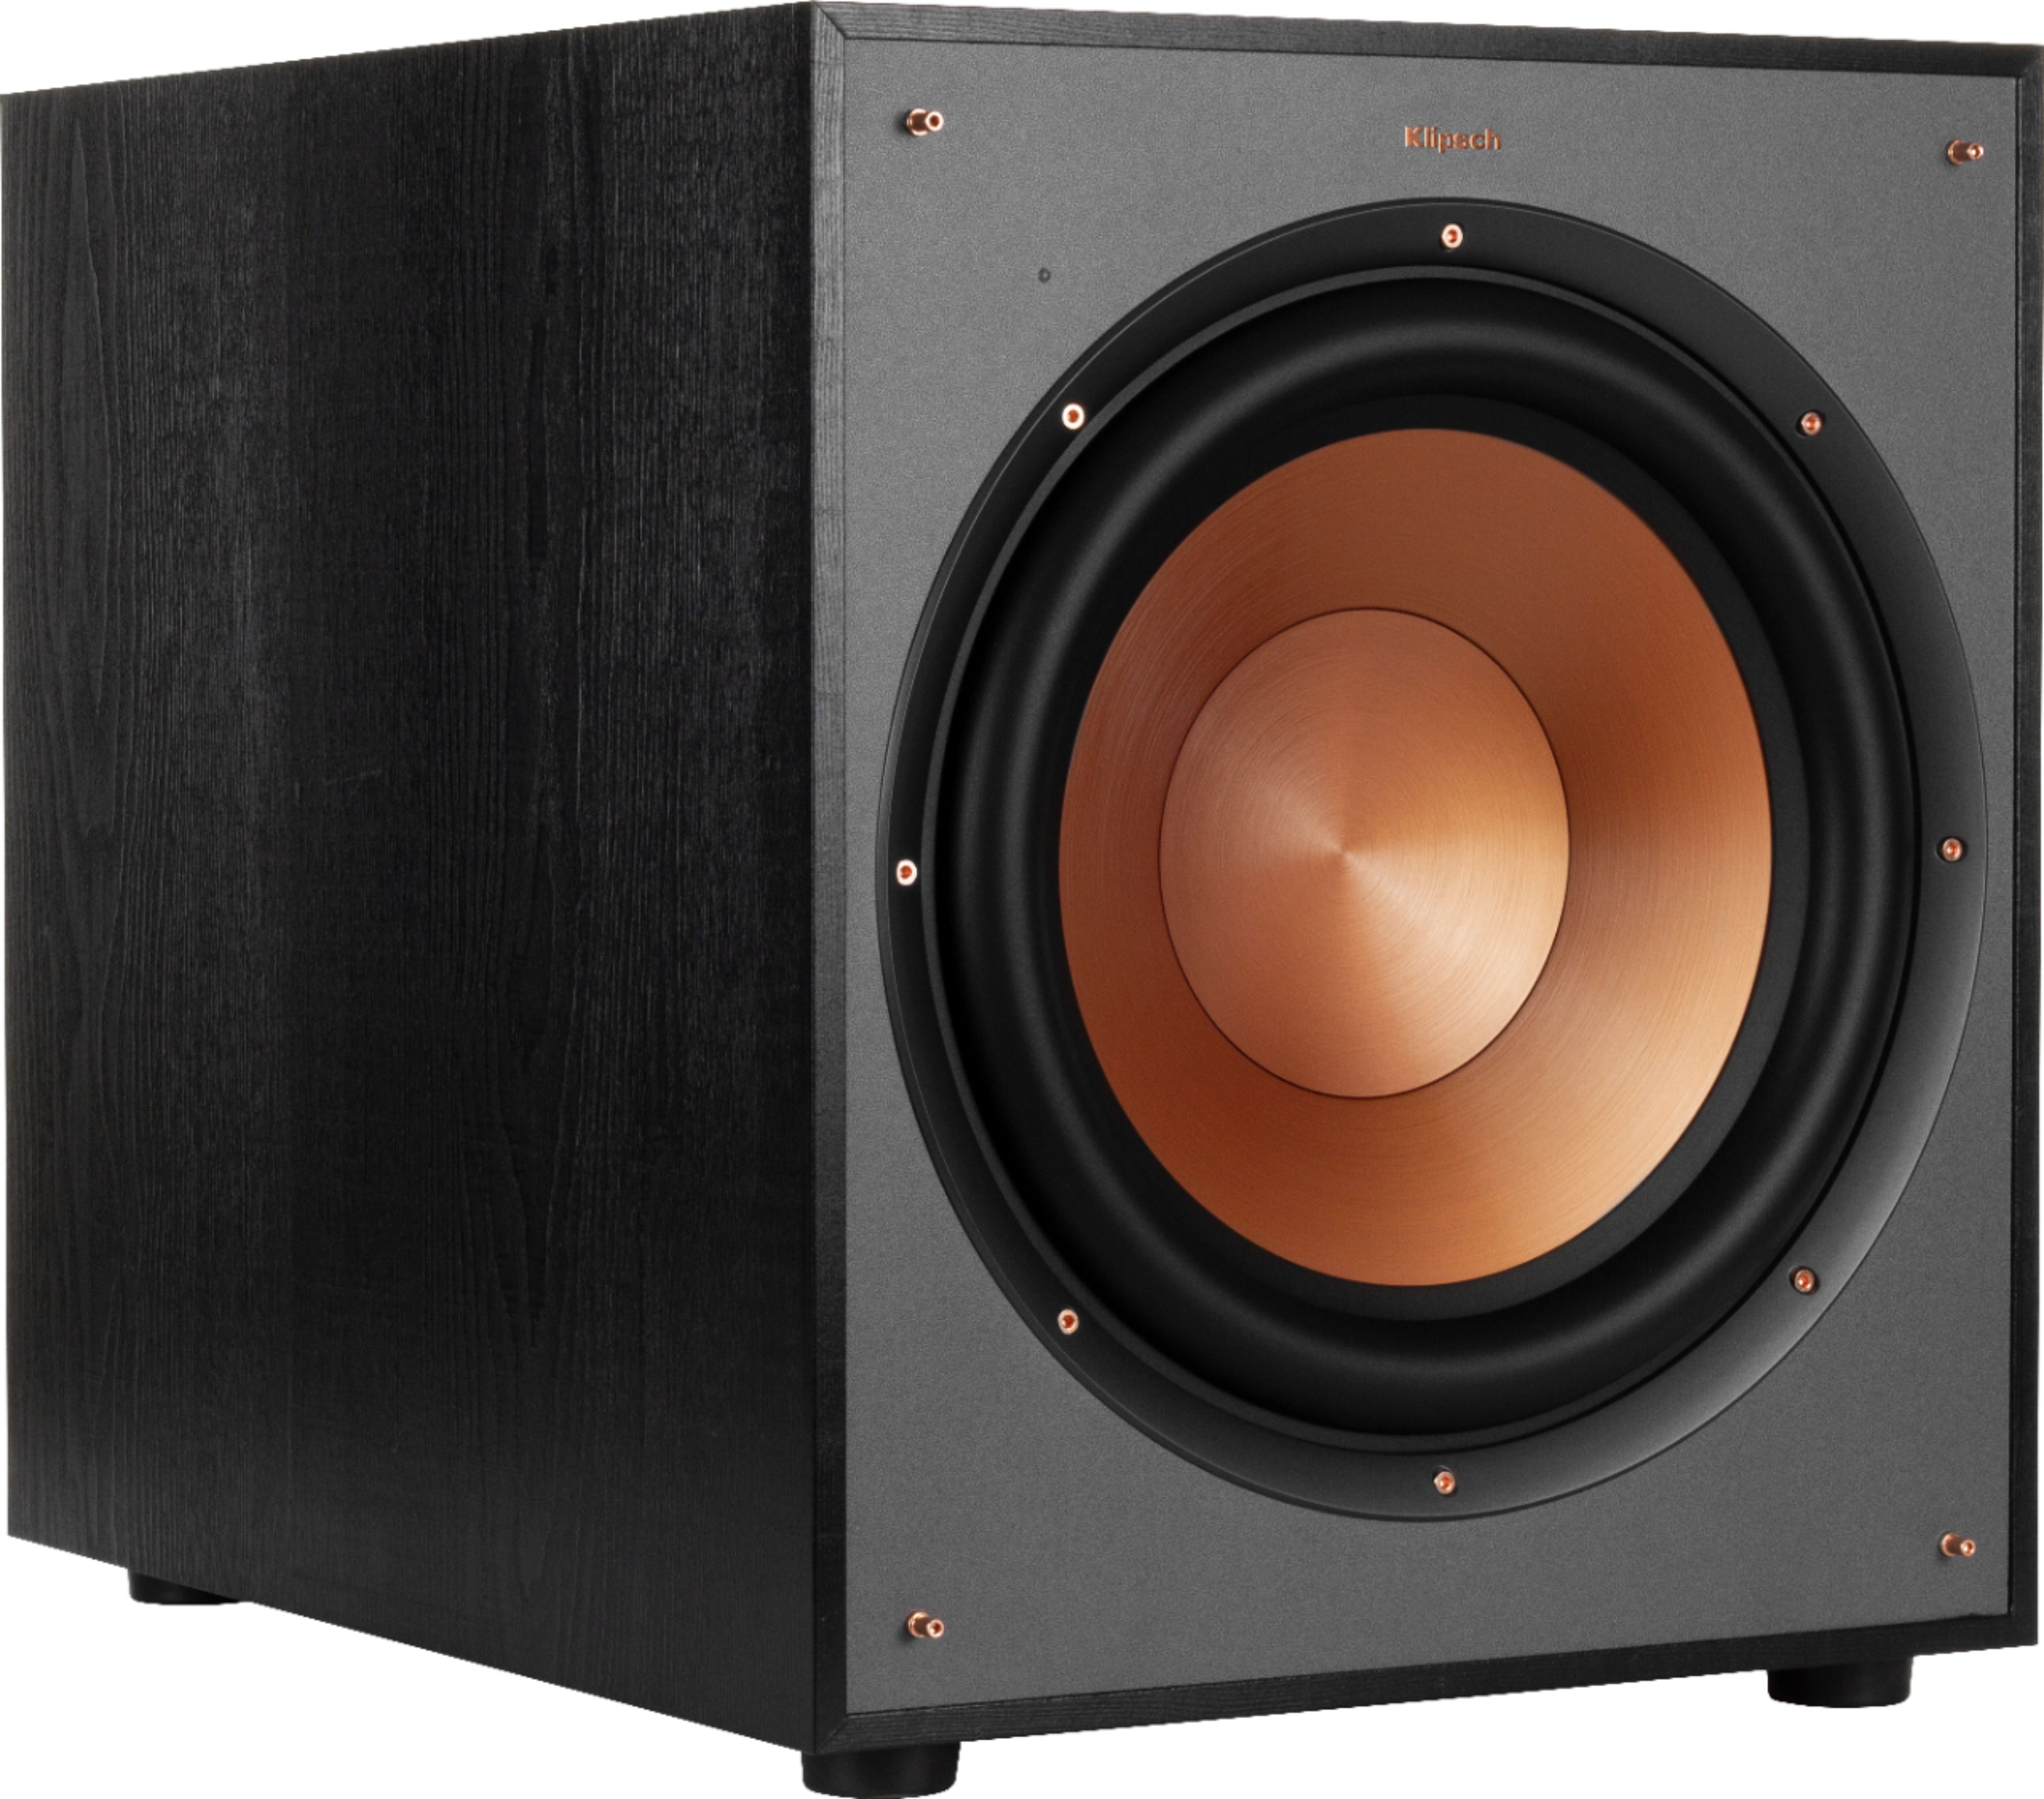 Angle View: Bowers & Wilkins - 600 Series Passive 2-Way Center-Channel Speaker - Black